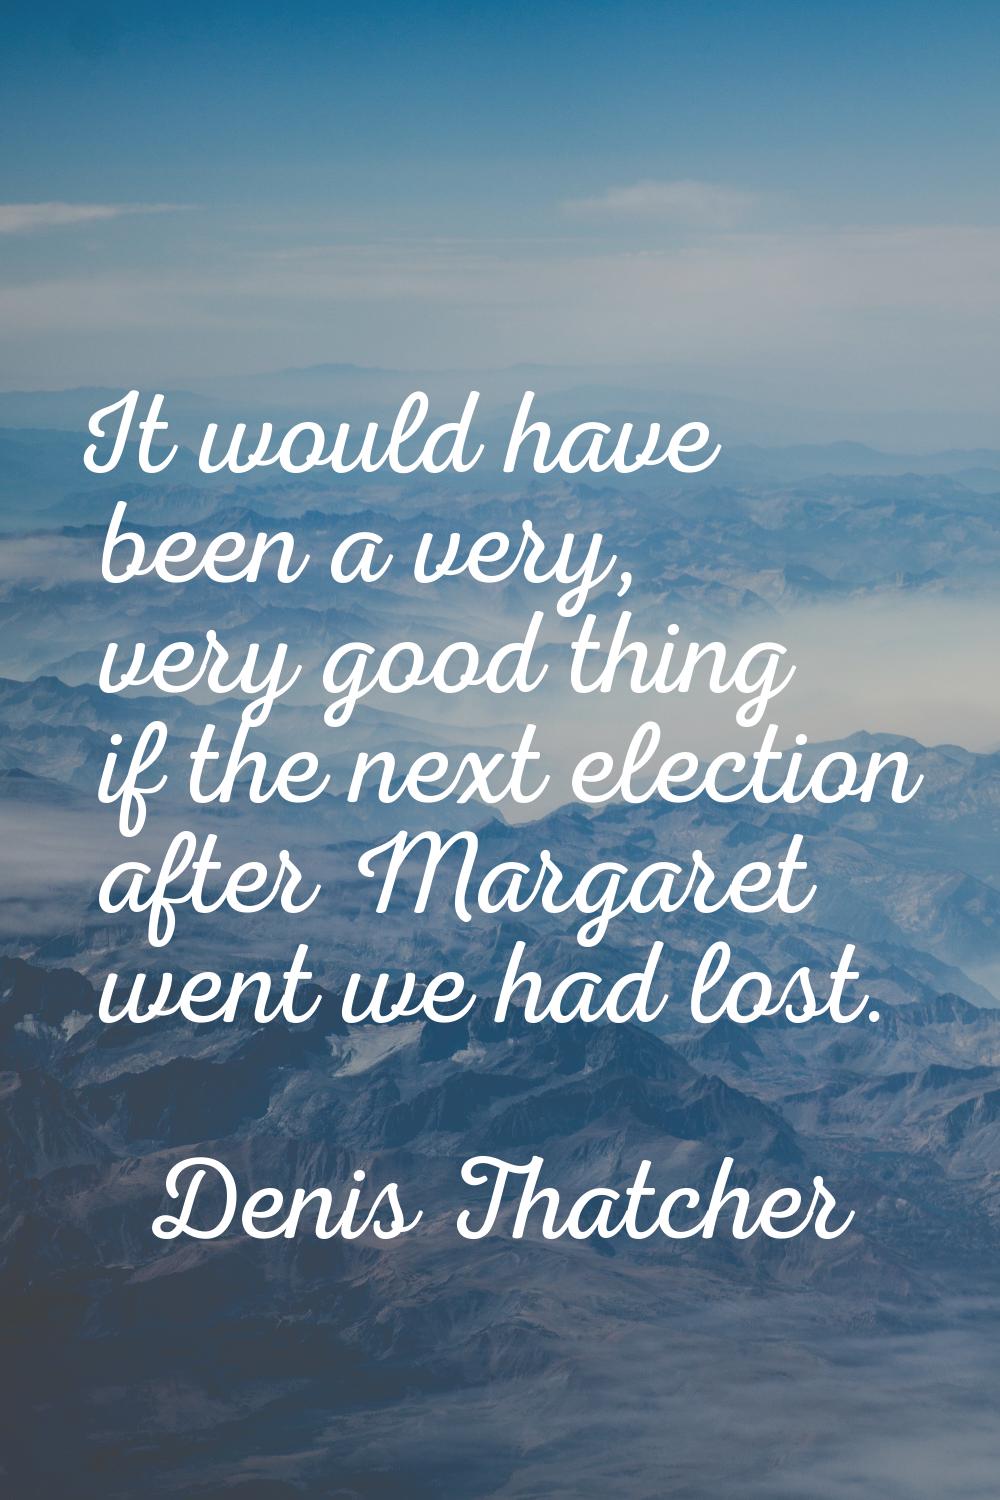 It would have been a very, very good thing if the next election after Margaret went we had lost.